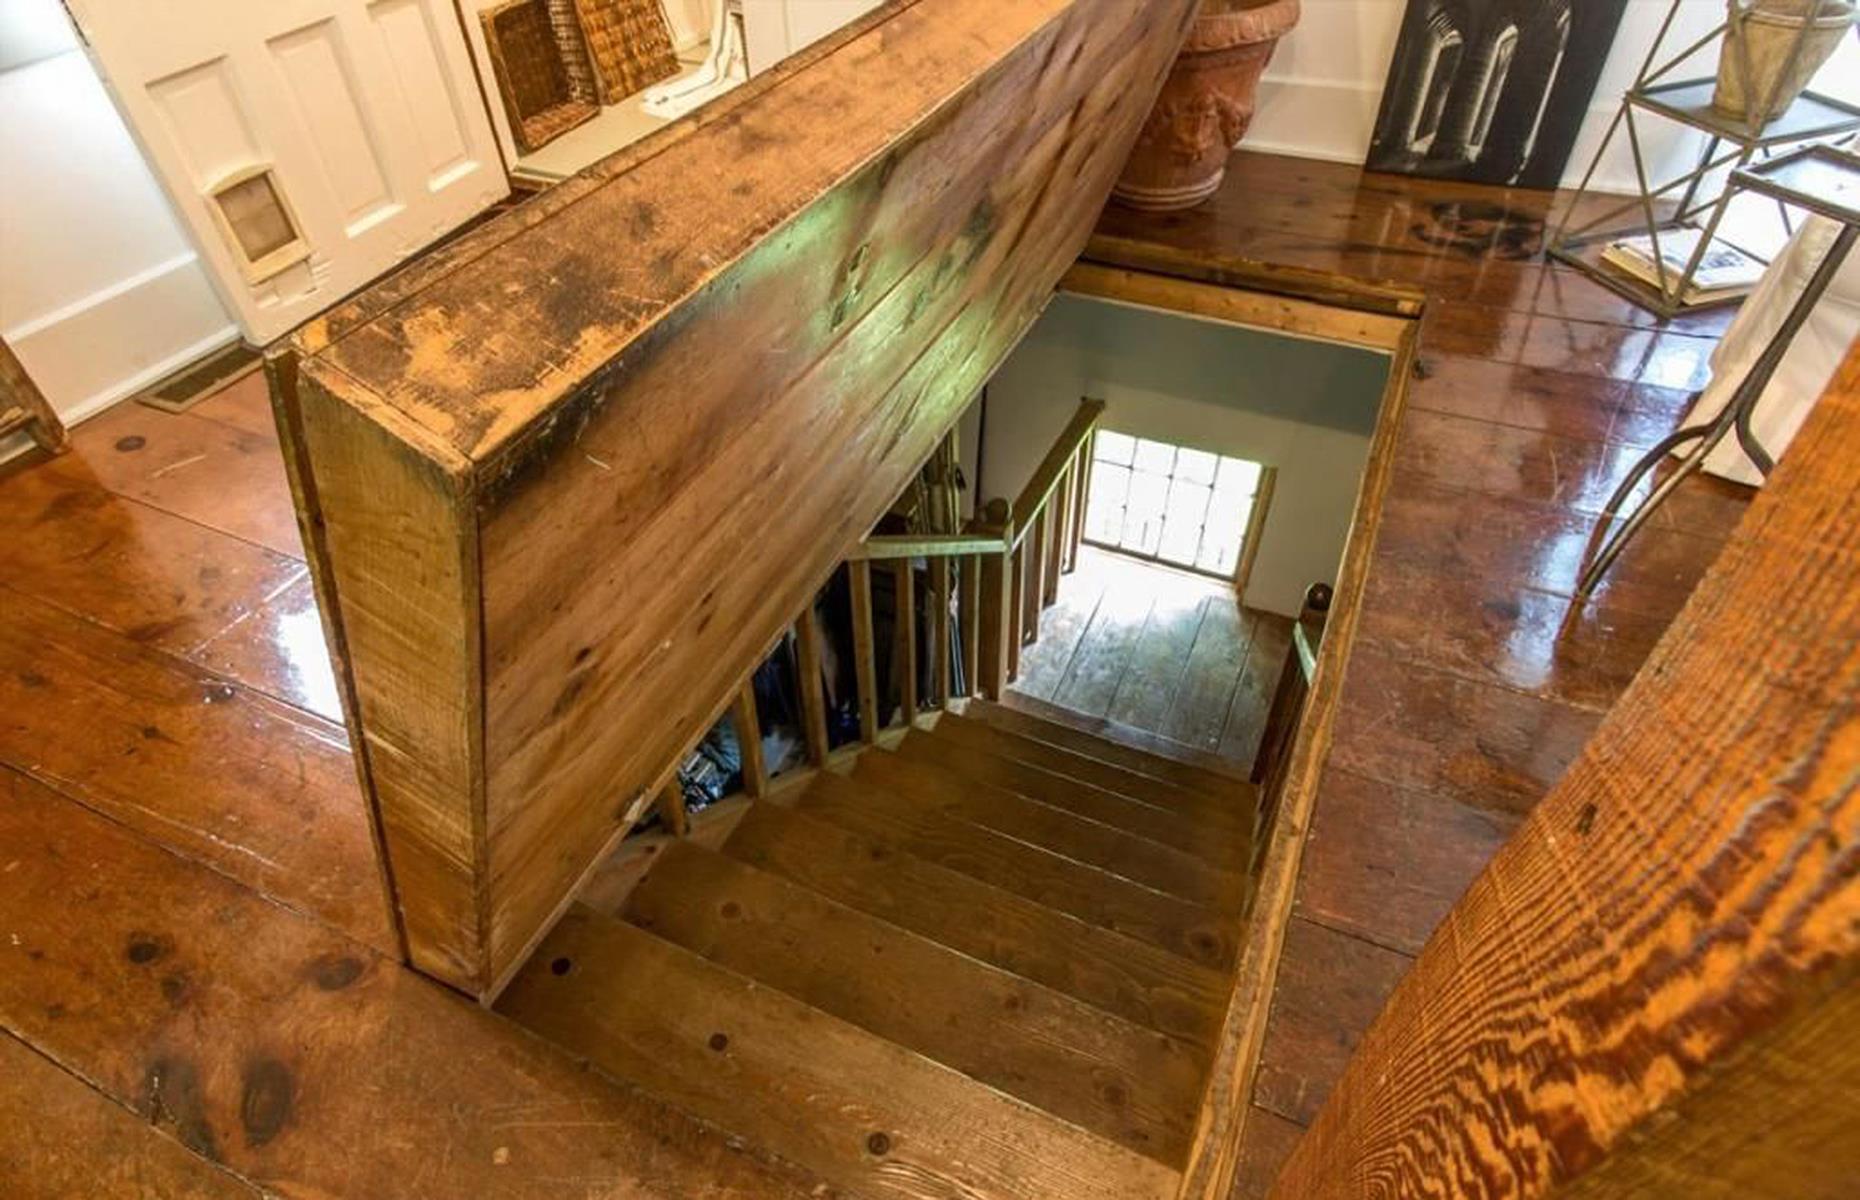 <p>The hatch is secured by a rope to a racket on the wall to reveal an old wooden staircase, leading down to the lower floor of this 1856 grist mill. Cover it up with a rug and you’d never even know it was there! </p>